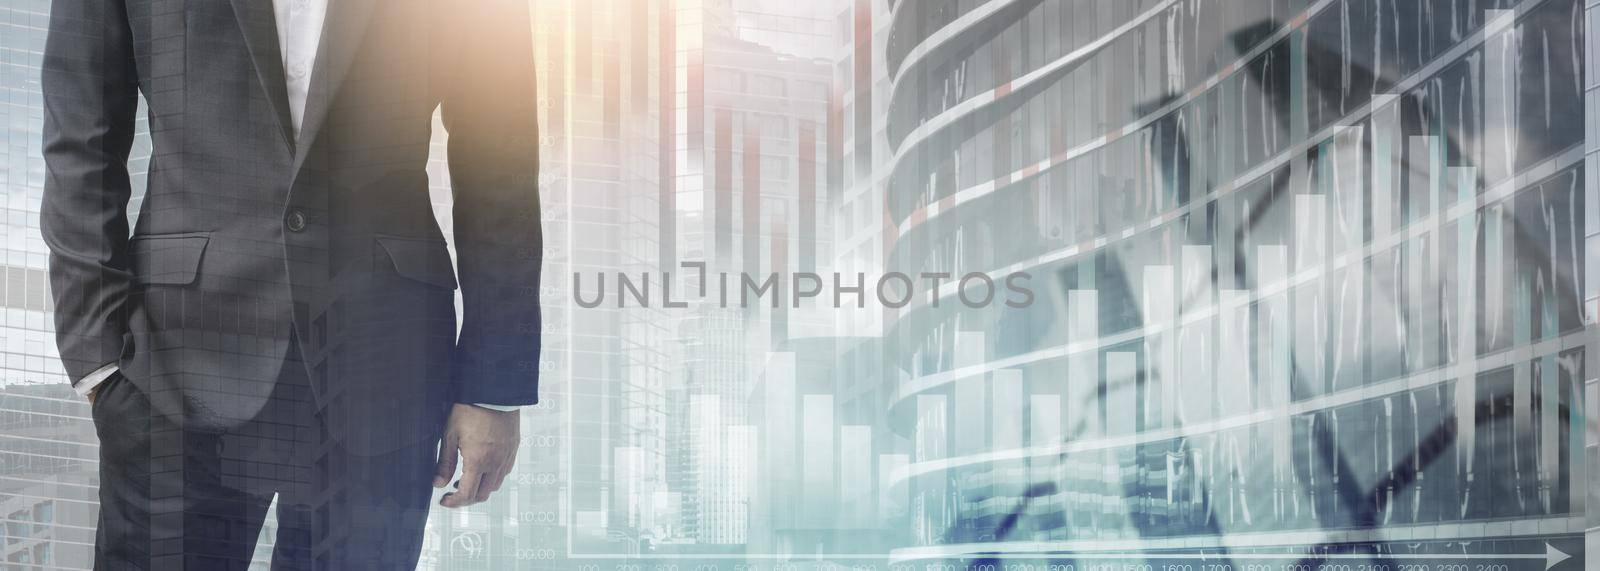 The double exposure image of the business man standing with bar graph and cityscape background.